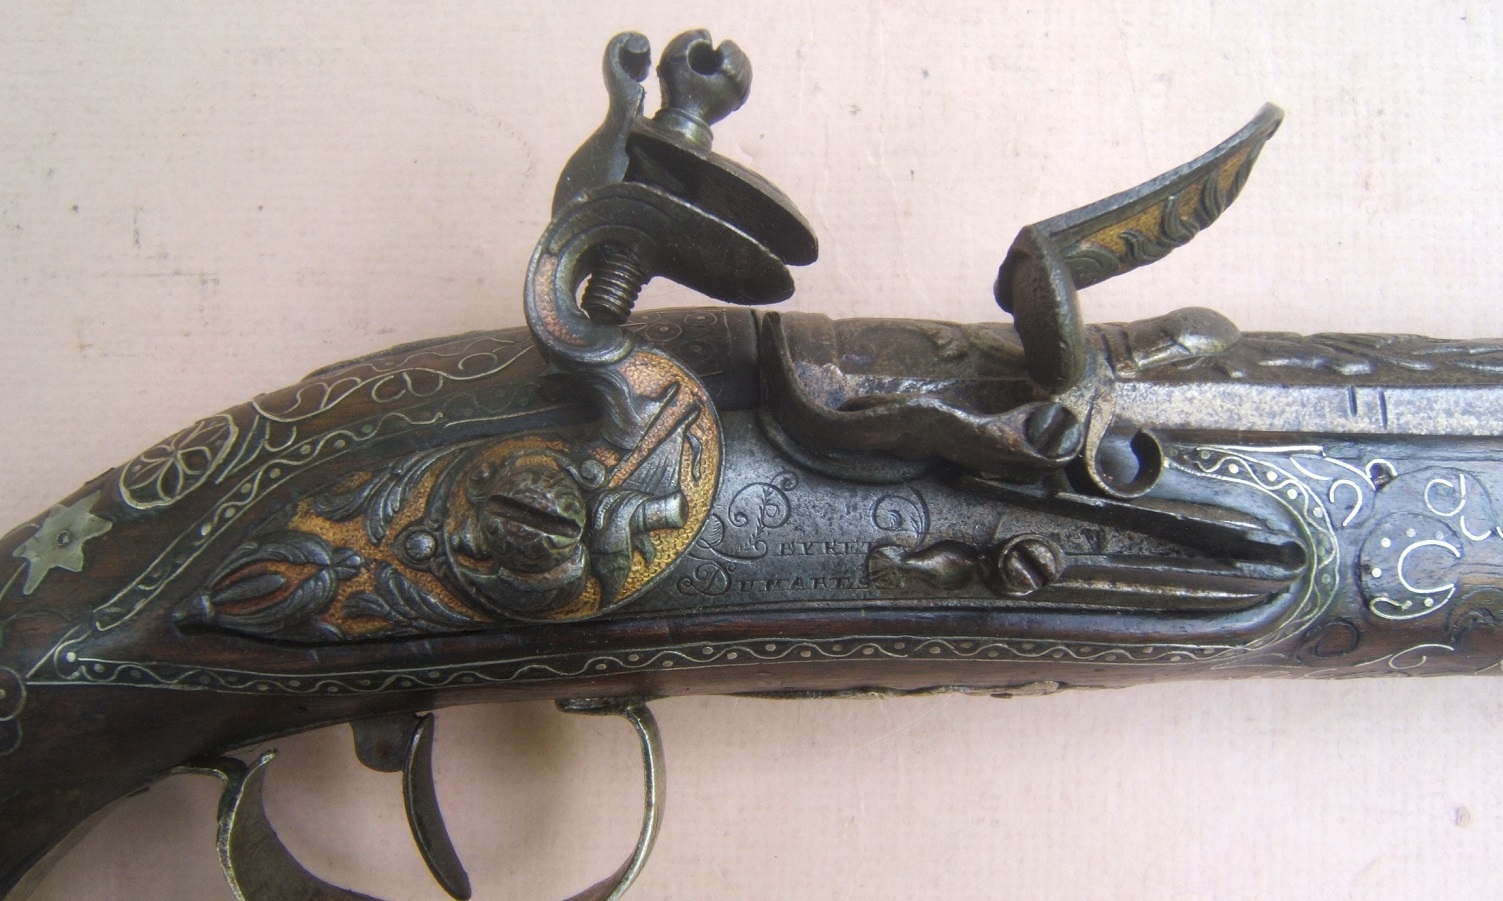 A VERY FINE QUALITY FRENCH SILVER MOUNTED & GOLD DAMASCENED FLINTLOCK HOLSTER PISTOL, by “PEYRTE DUMAREST” (FOR EASTERN/TURKISH MARKET, ca. 1780 view 3